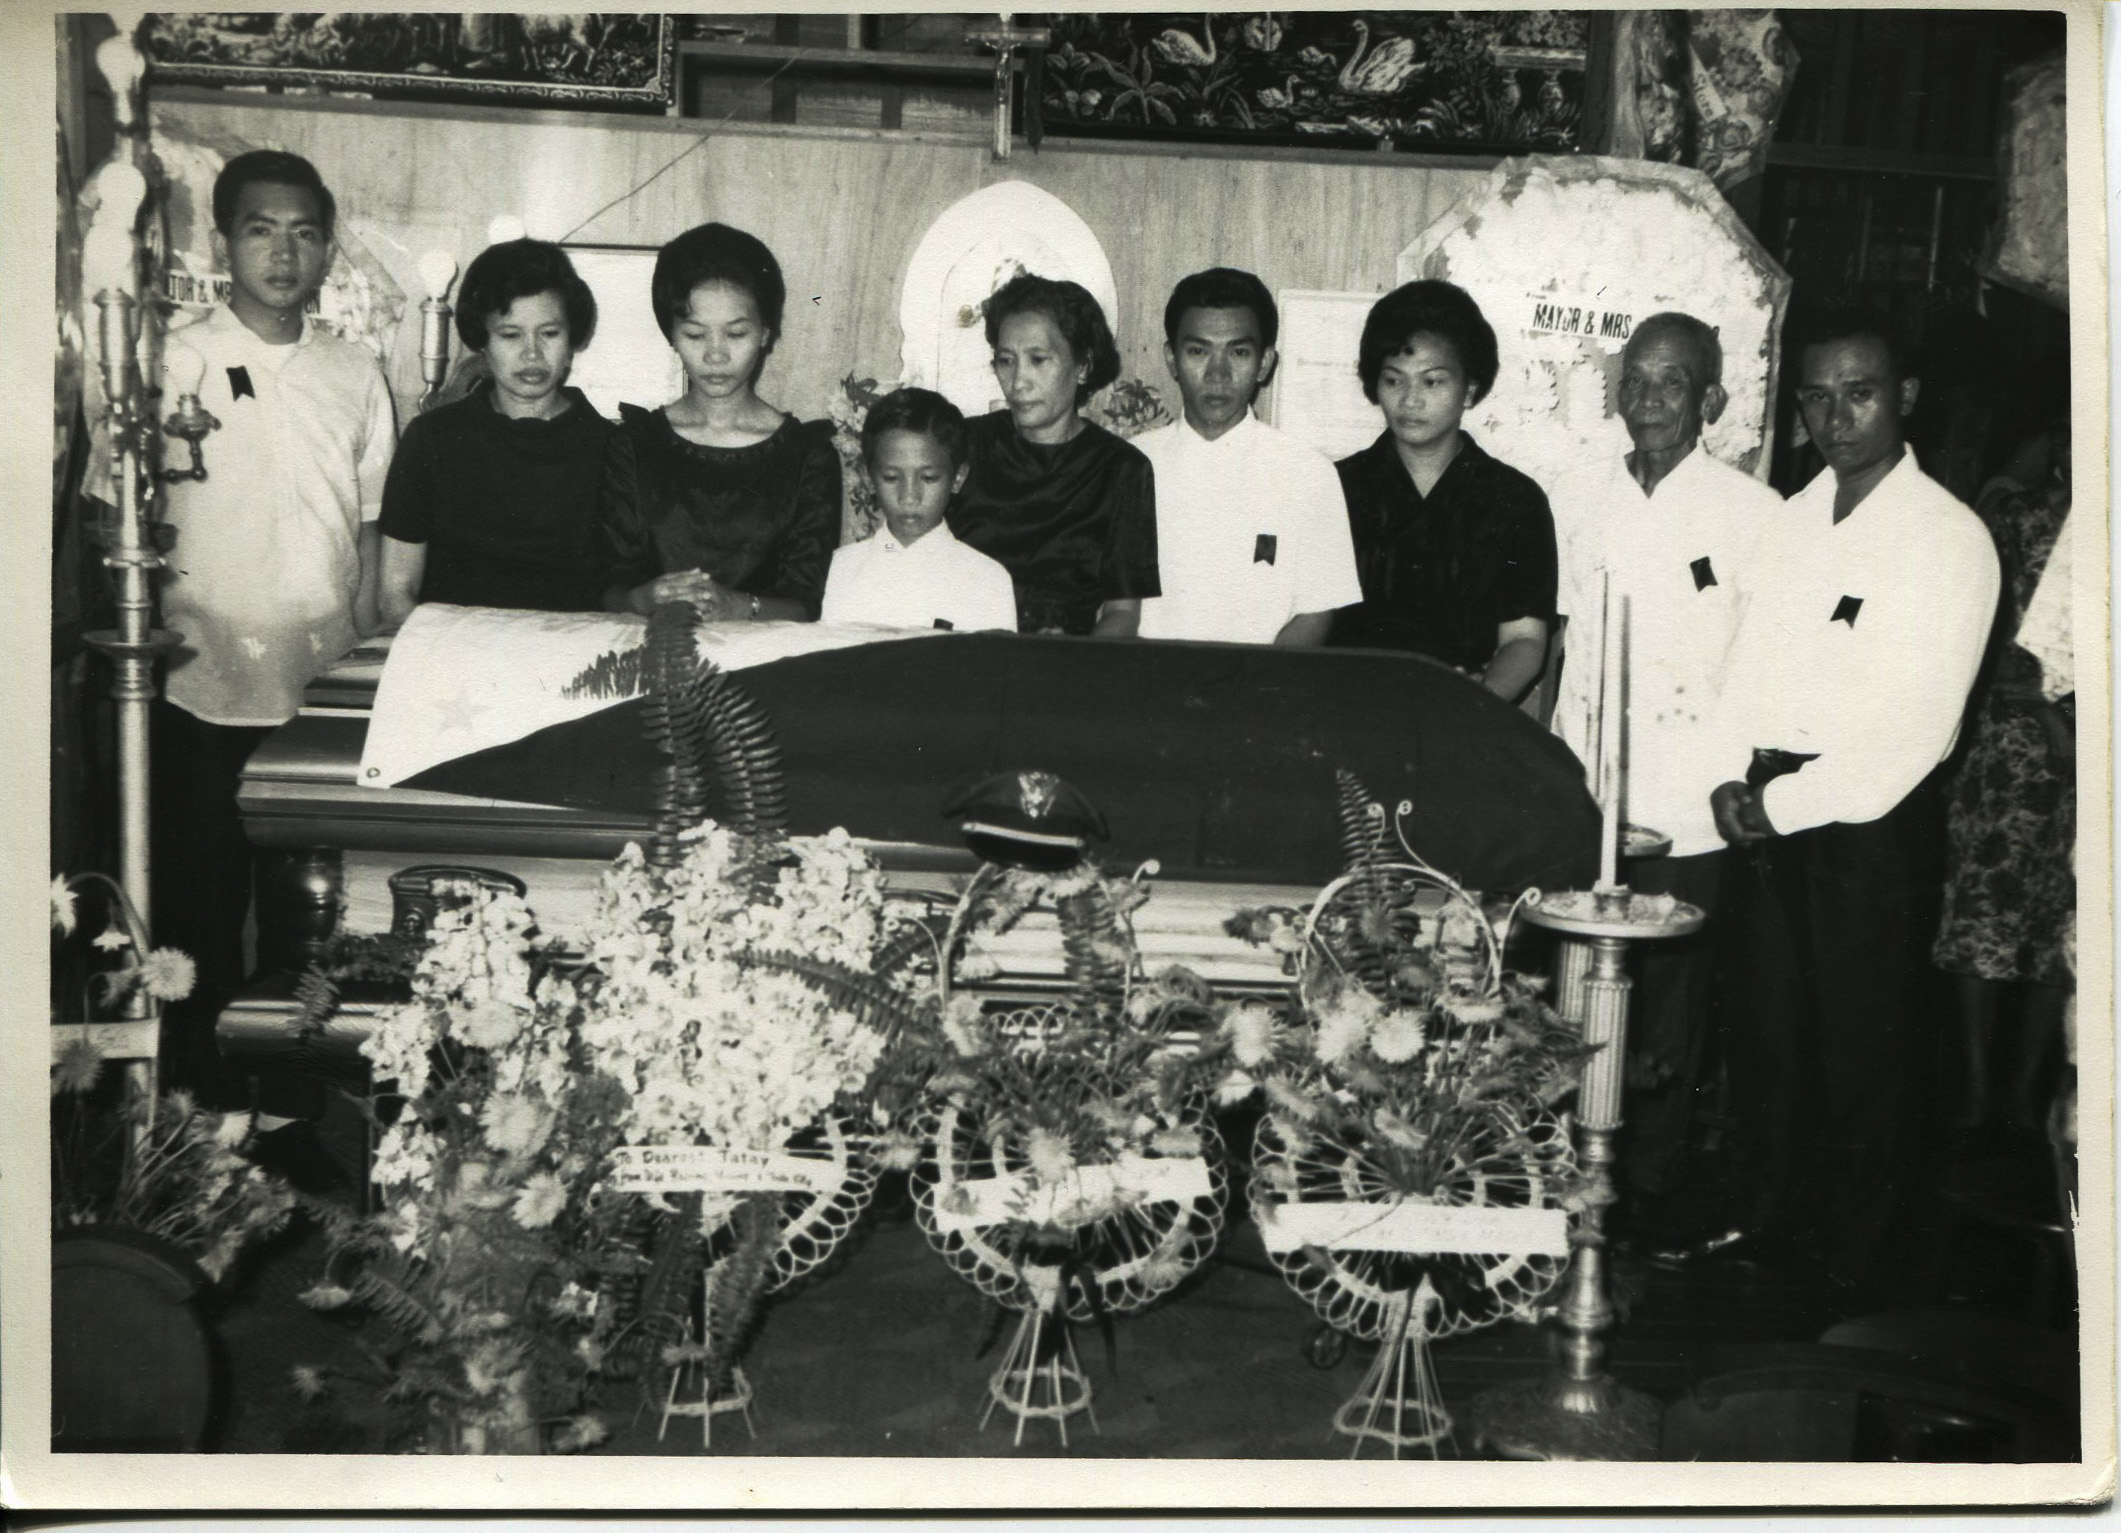 Photo of Arguelles' family, October 13, 1967. Arguelles acquired the photo in 2011 when her dad died. It was taken at Jaro Cathedral in Iloilo City at Arguelles’ grandfather’s funeral. The grandfather was a policeman and his funeral was very impressive with salutes and tributes. Left to right: Pedro (uncle),Magdalena (mother), Isabel (aunt), Eliseo (uncle), “Noning” Dionisia (step grandmother), Ismael (uncle), Amparo (aunt), unknown, father “Toting” Jose. Arguelles likes that this picture shows how important Catholicism has been to her family, and how well loved hergrandfather was. Any views, findings, conclusions, or recommendations expressed in this story do not necessarily represent those of the National Endowment for the Humanities. (c) Field Museum of Natural History - CC BY-NC 4.0